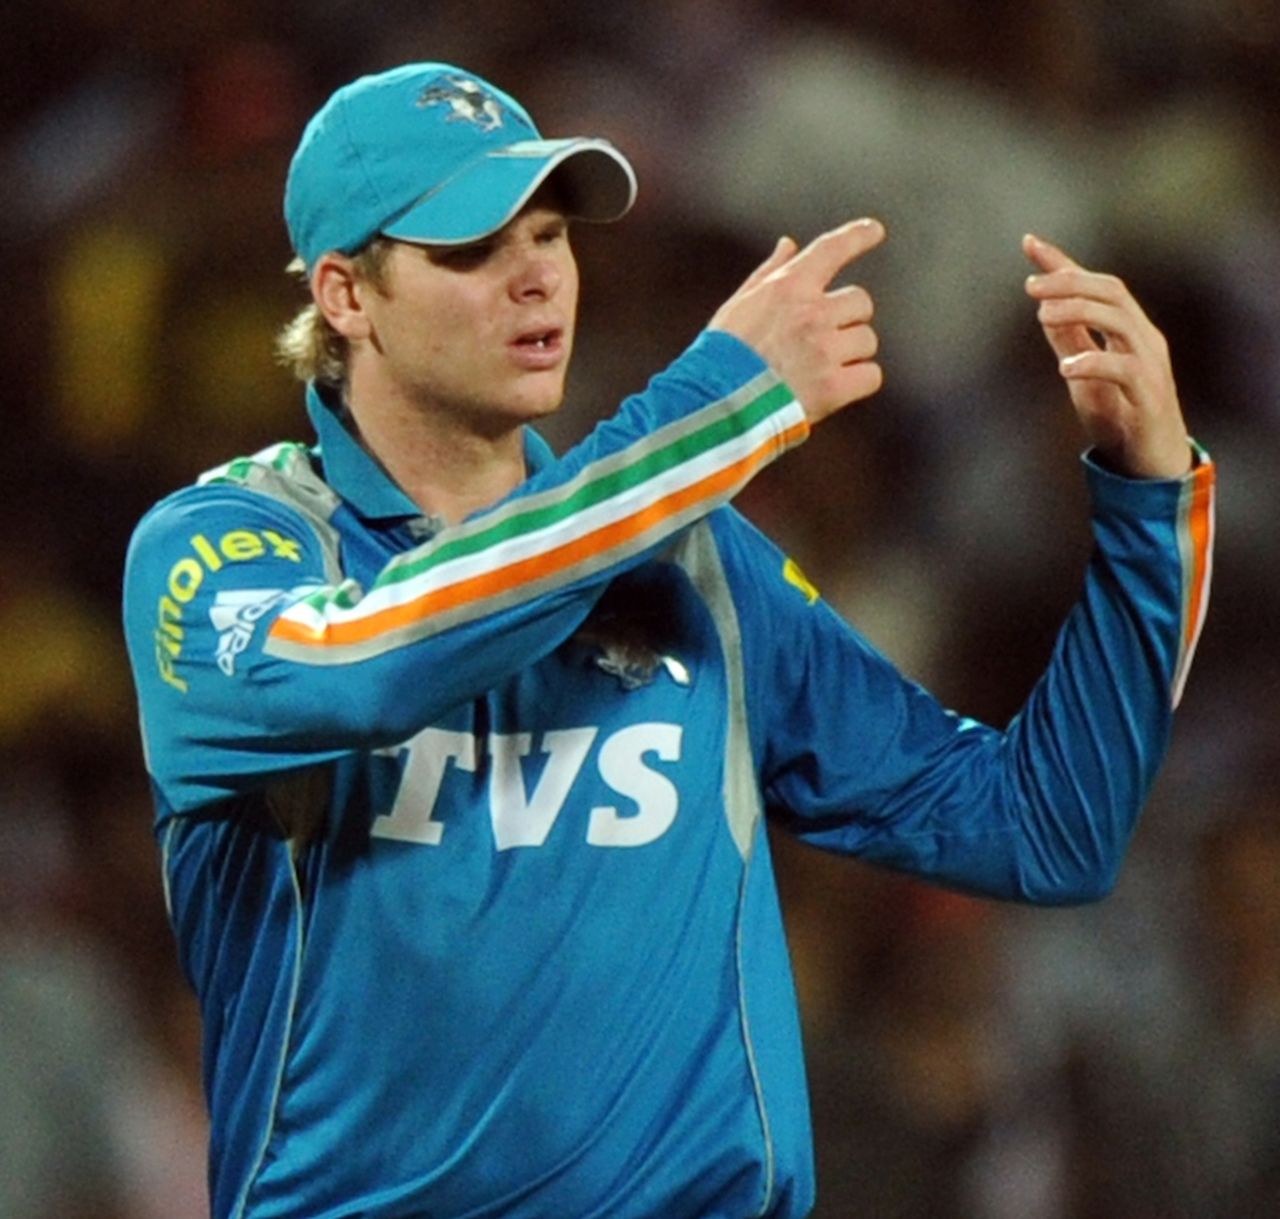 Steven Smith led the side in absence of Sourav Ganguly, Pune Warriors v Royal Challengers Bangalore, IPL, Pune, May 11, 2012